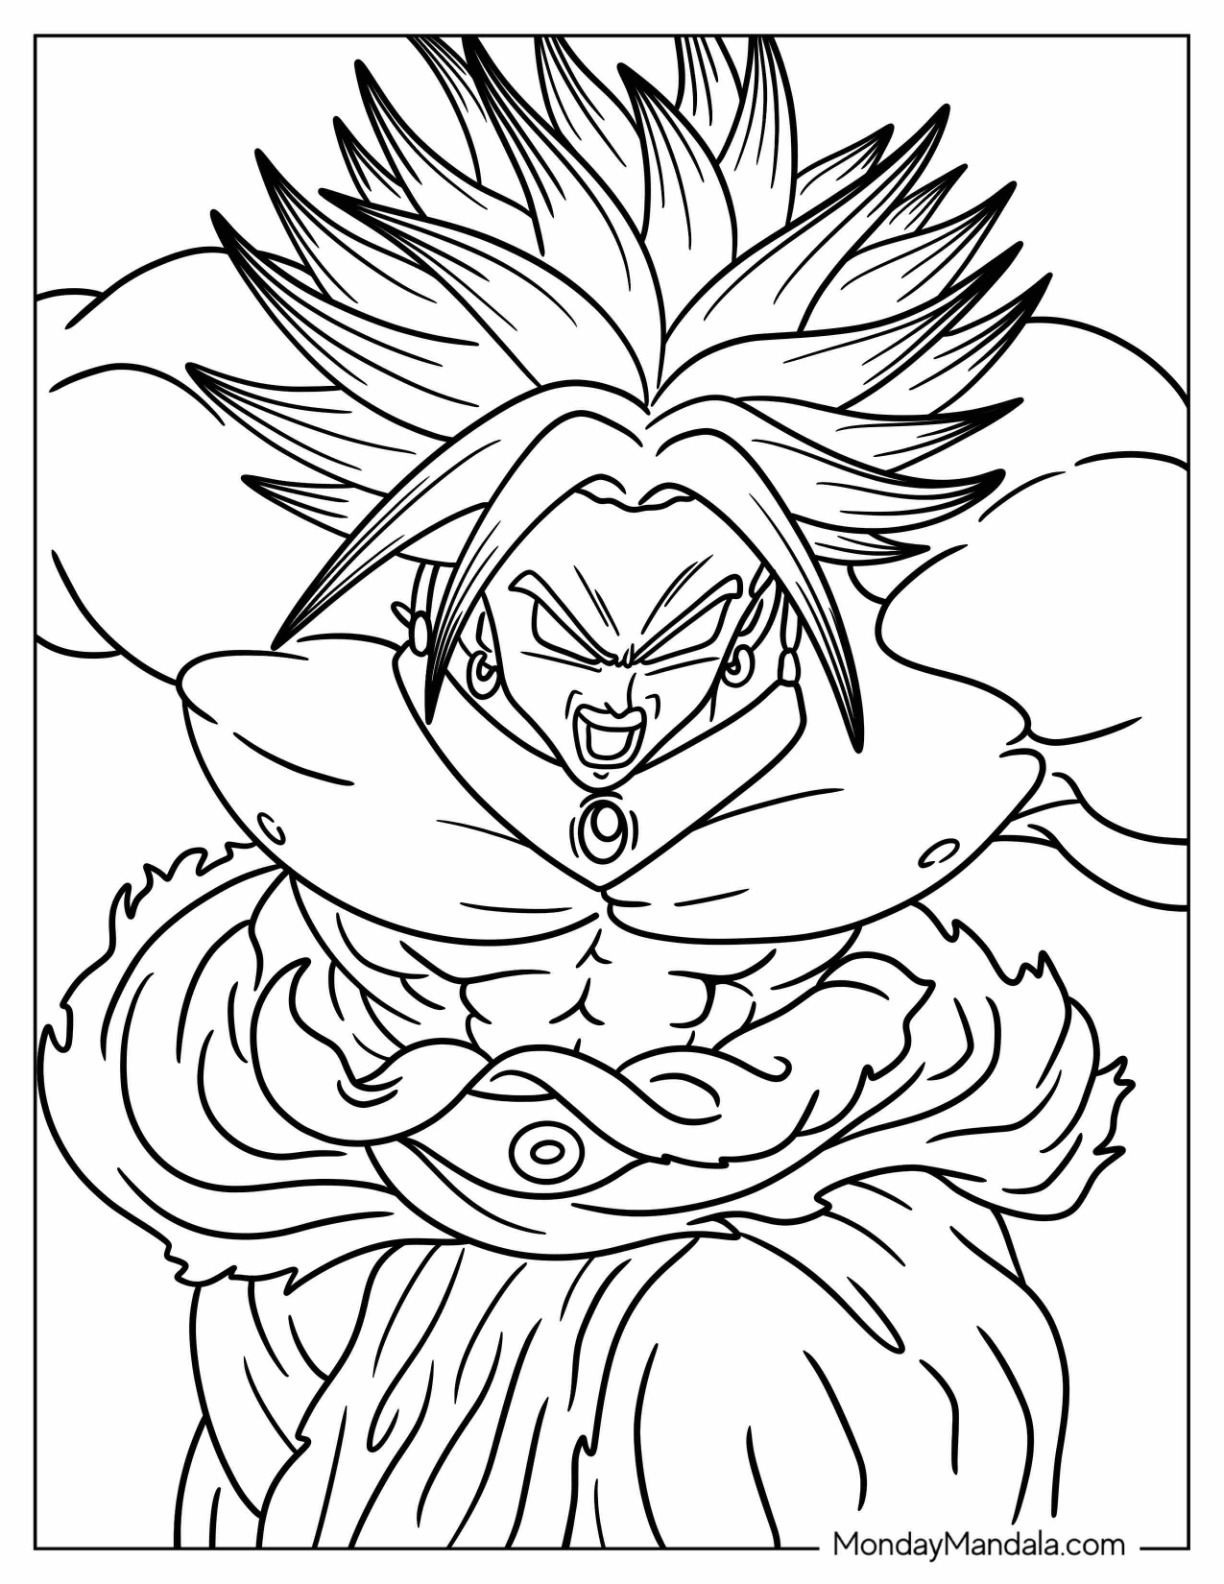 Broly coloring pages free pdf printables